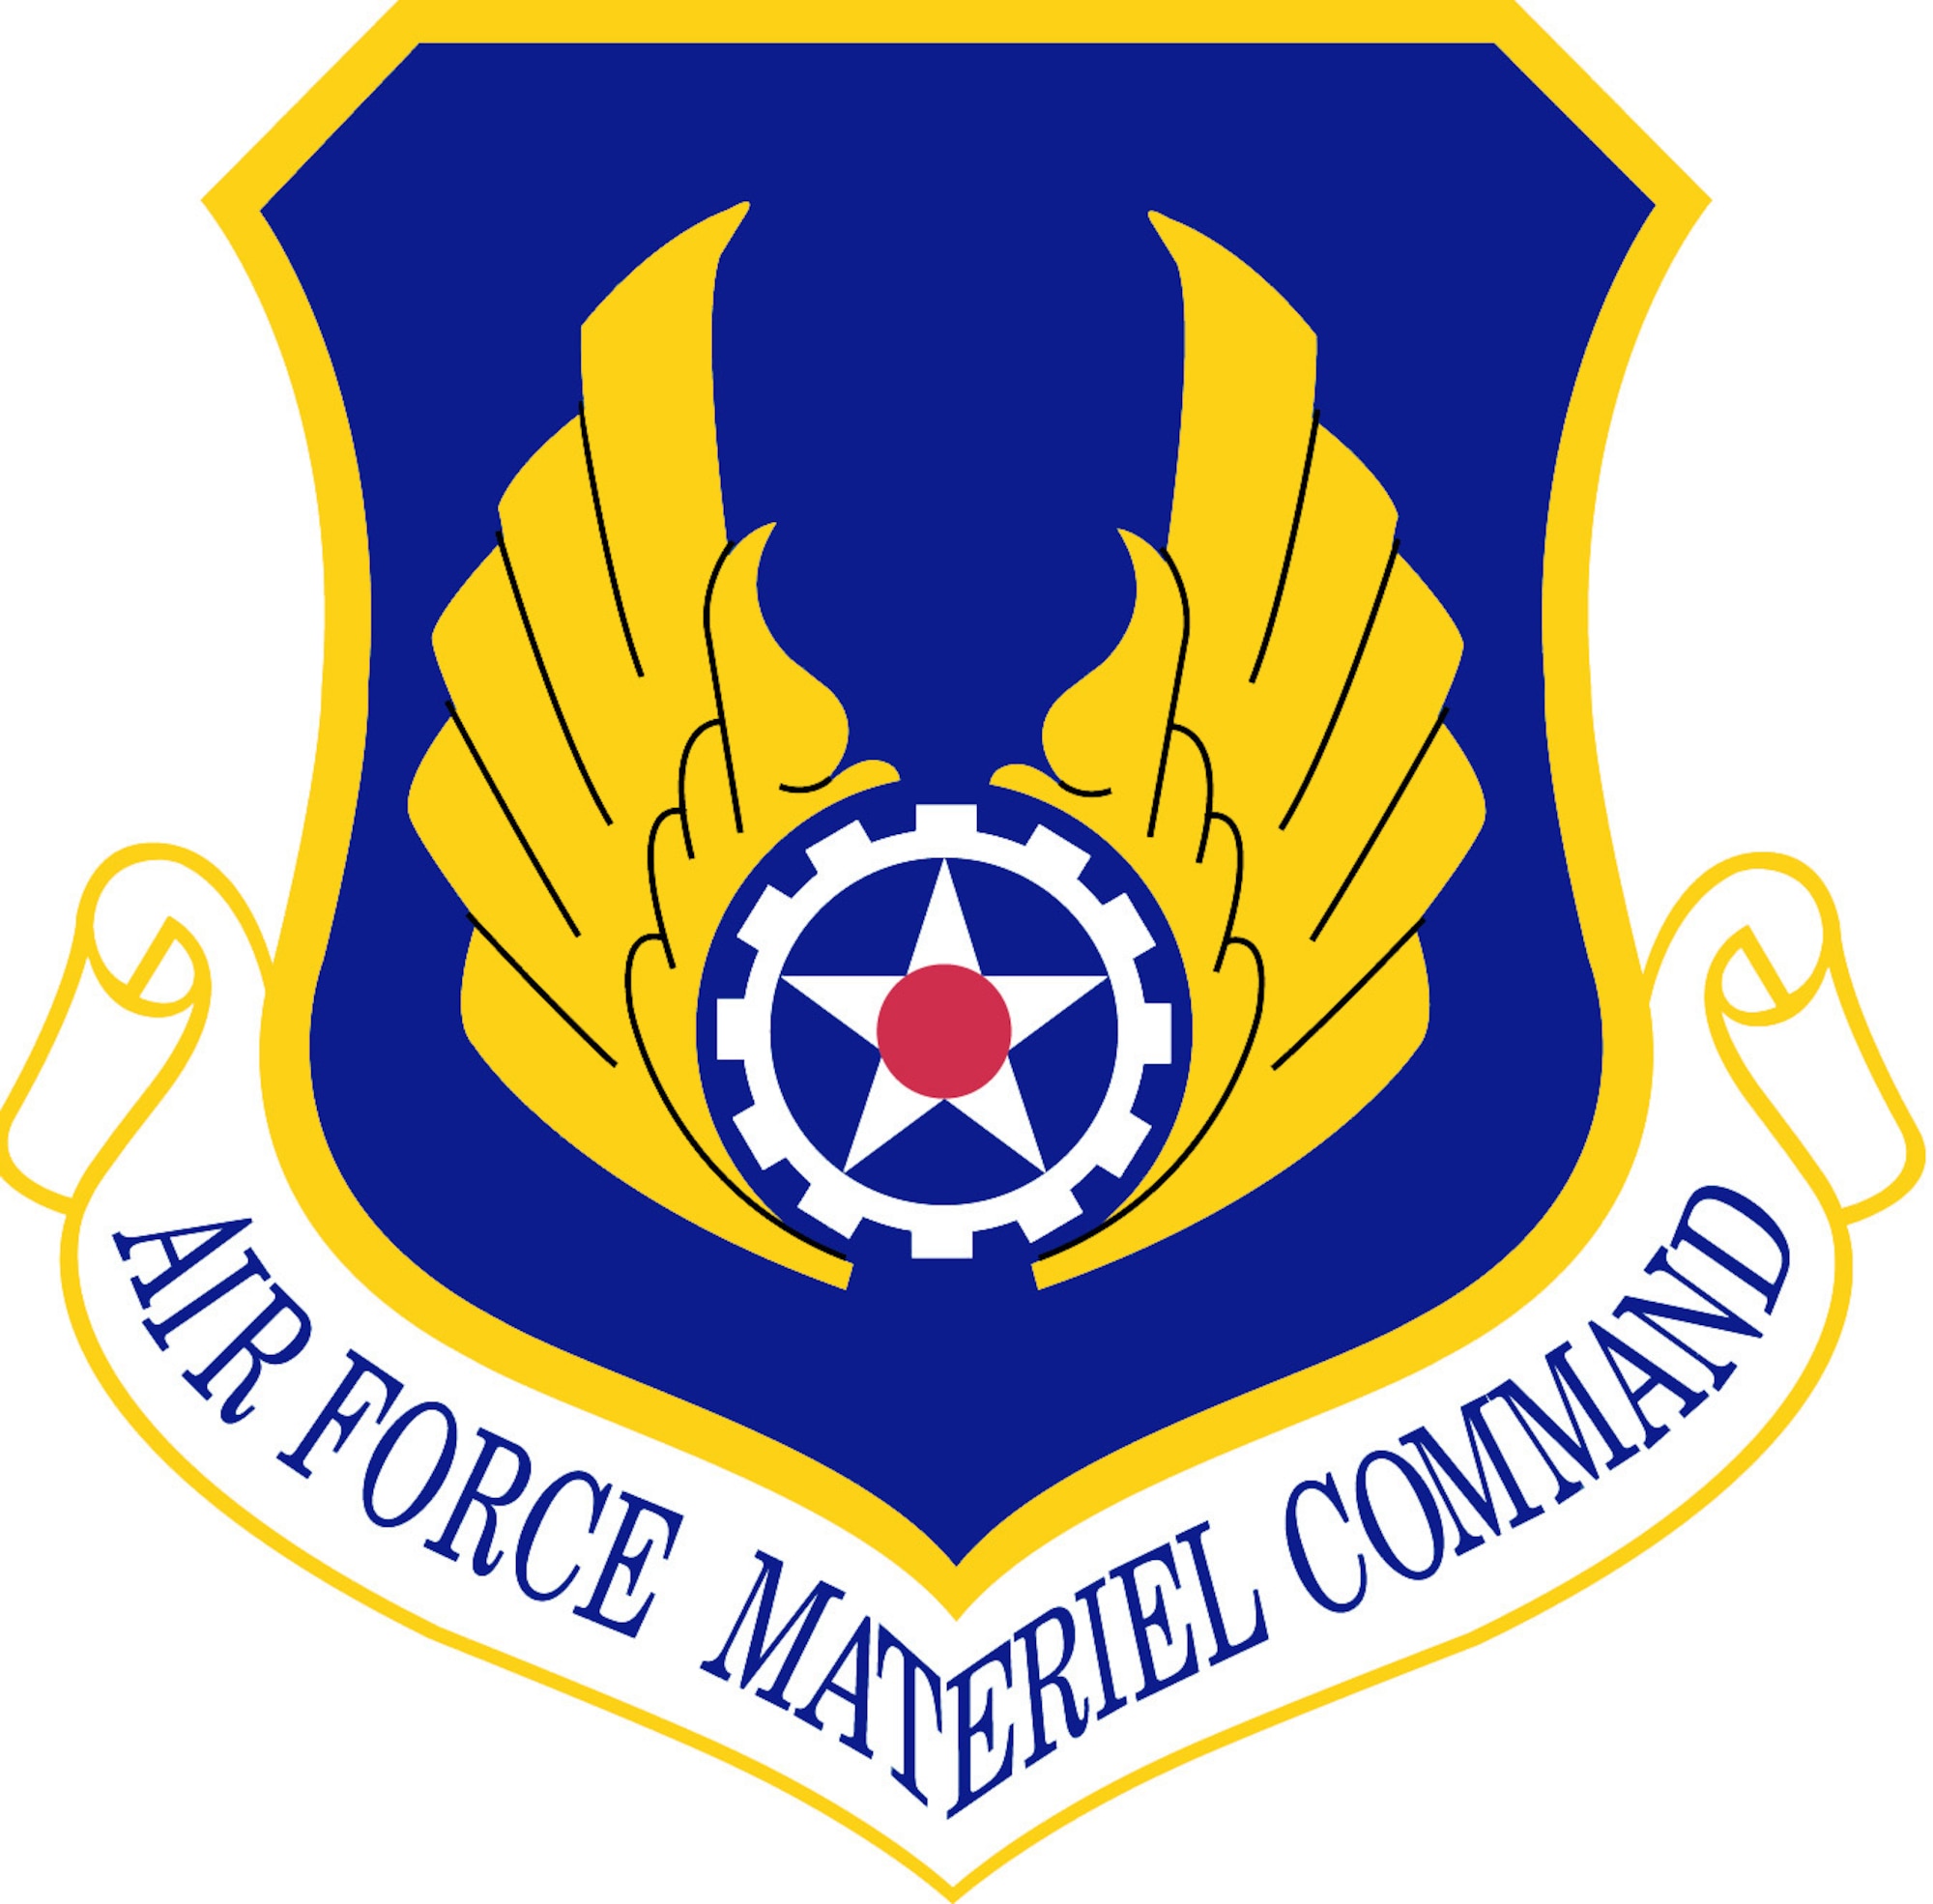 Shield of the Air Force Materiel Command (U.S. Air Force graphic)